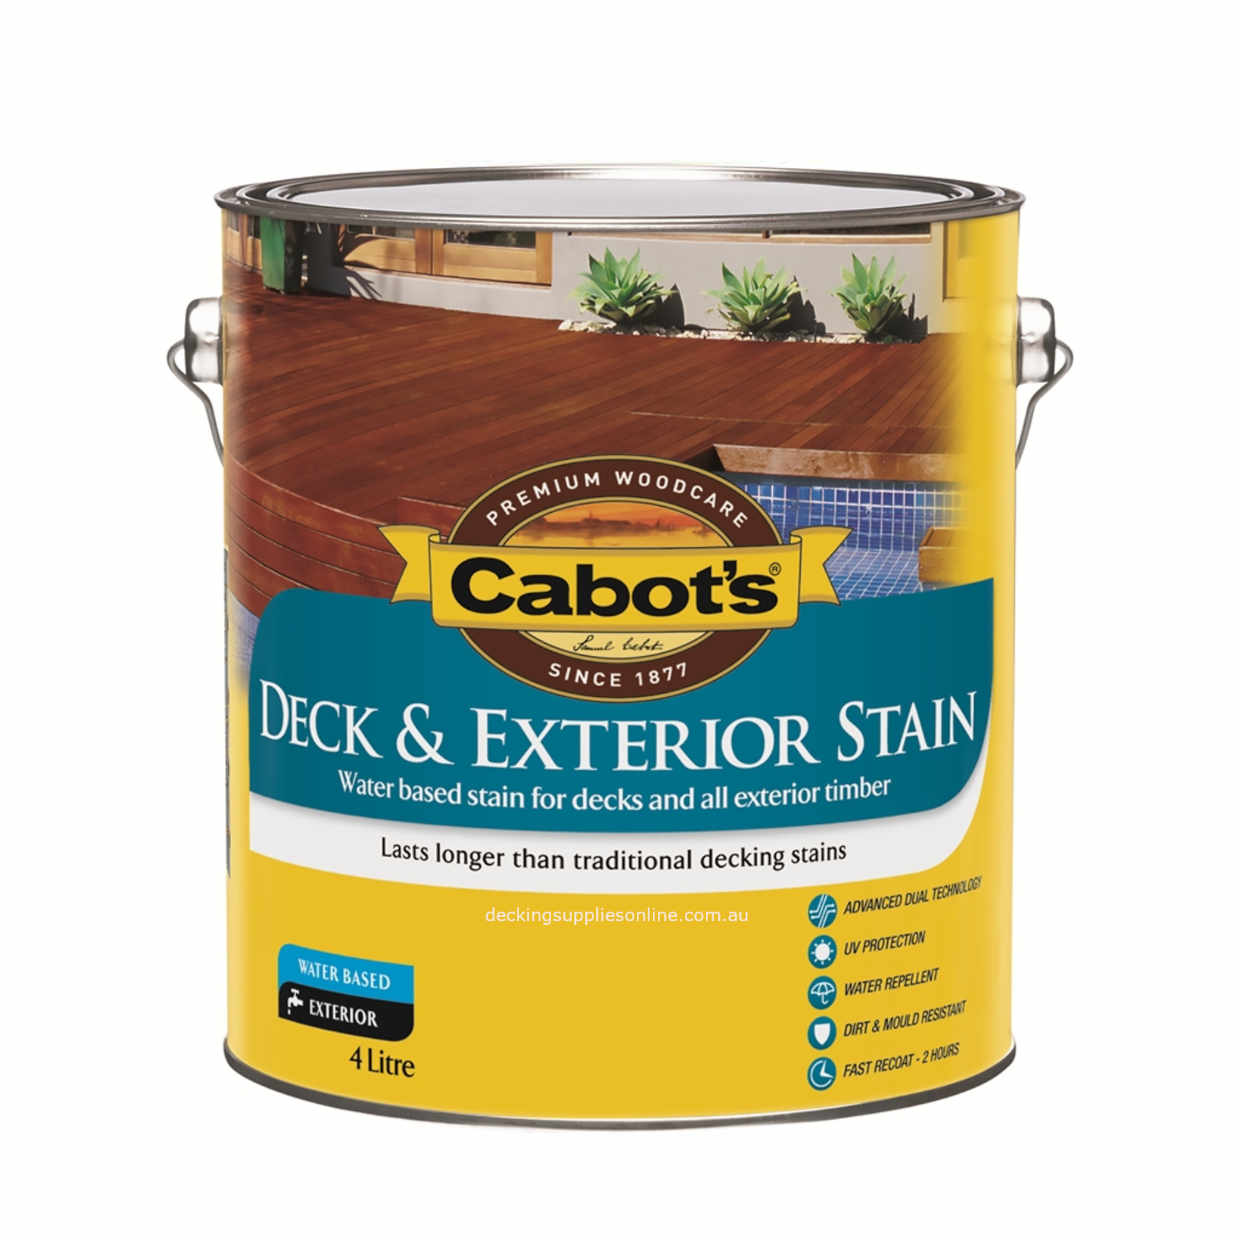 Cabots_Deck___Exterior_Stain_Water_Based_4_litre_Decking_Supplies_Online